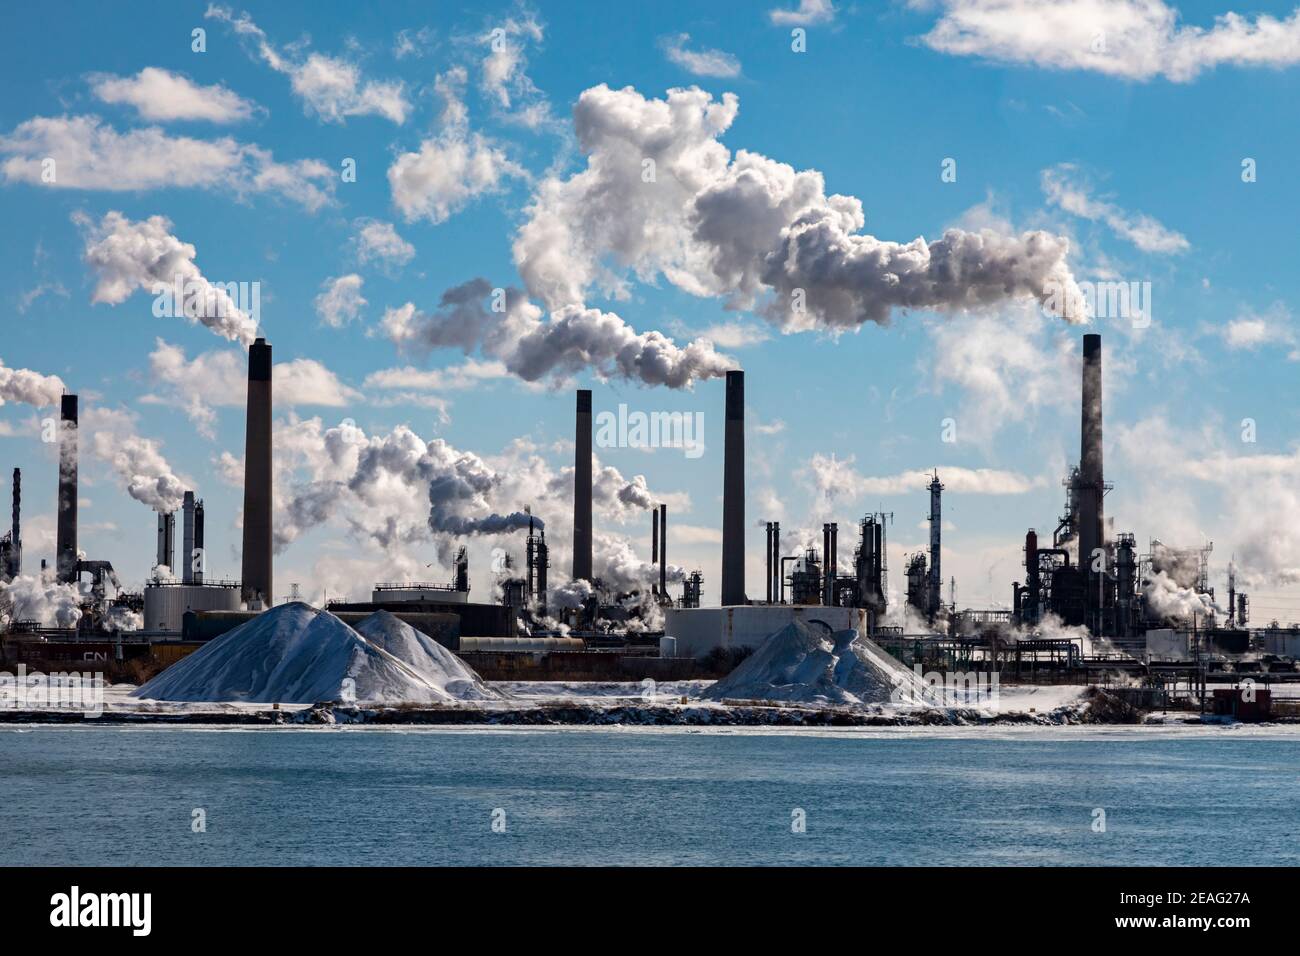 Sarnia, Ontario, Canada - Imperial Oil's refinery and chemical plant on the St. Clair River. ExxonMobil is the majority owner of Imperial Oil. Stock Photo